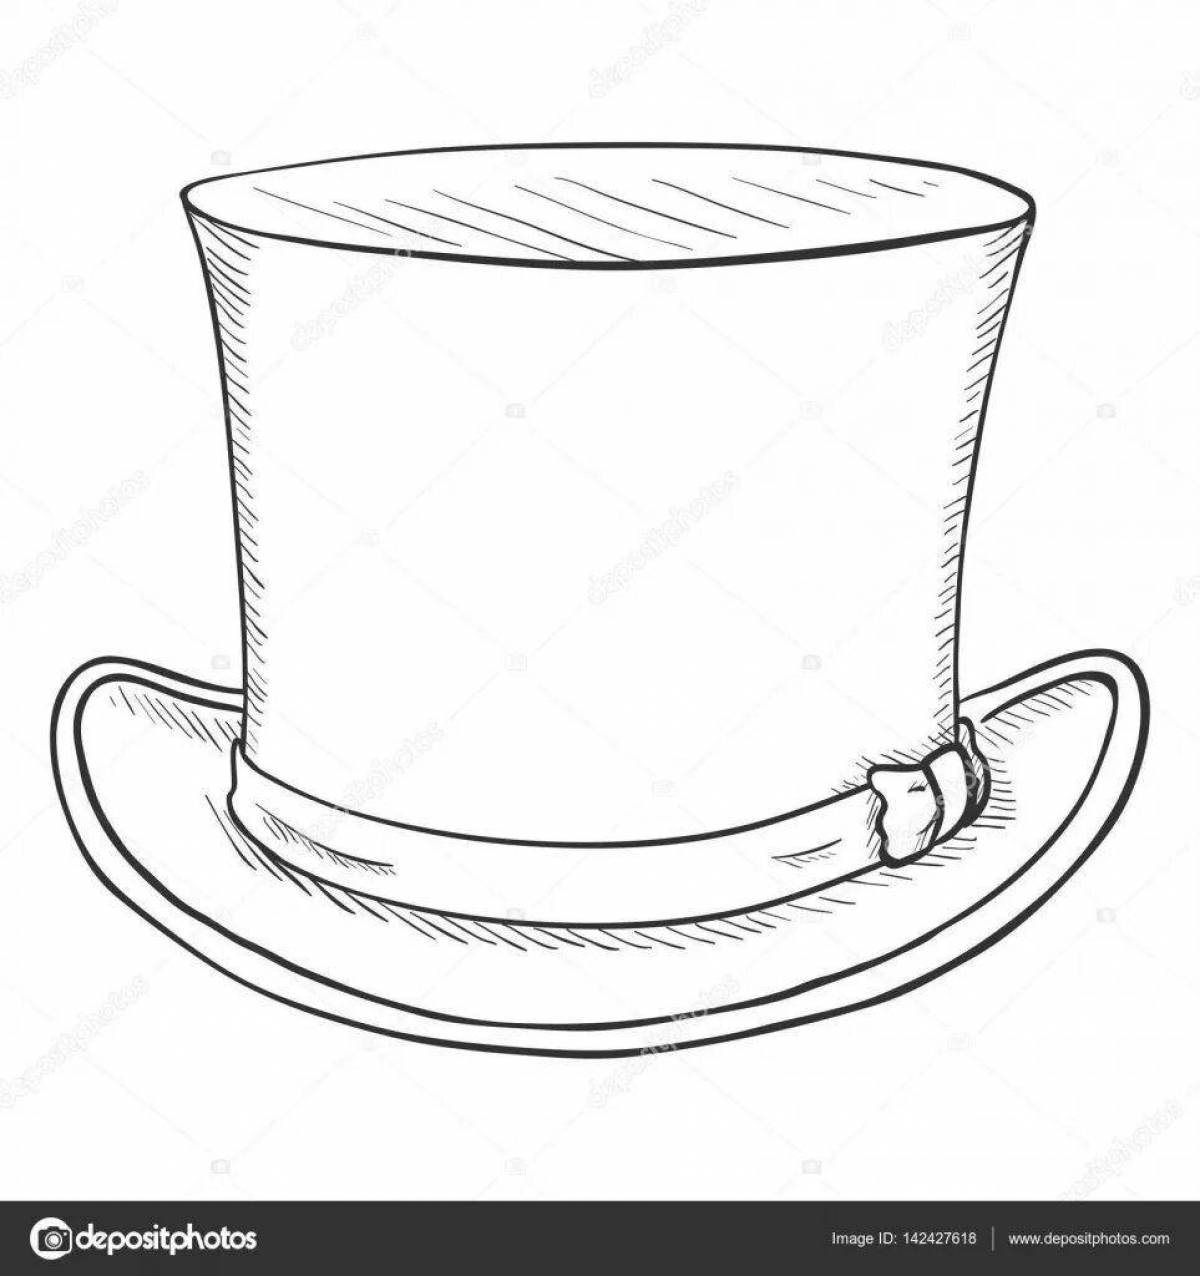 Adorable top hat coloring page